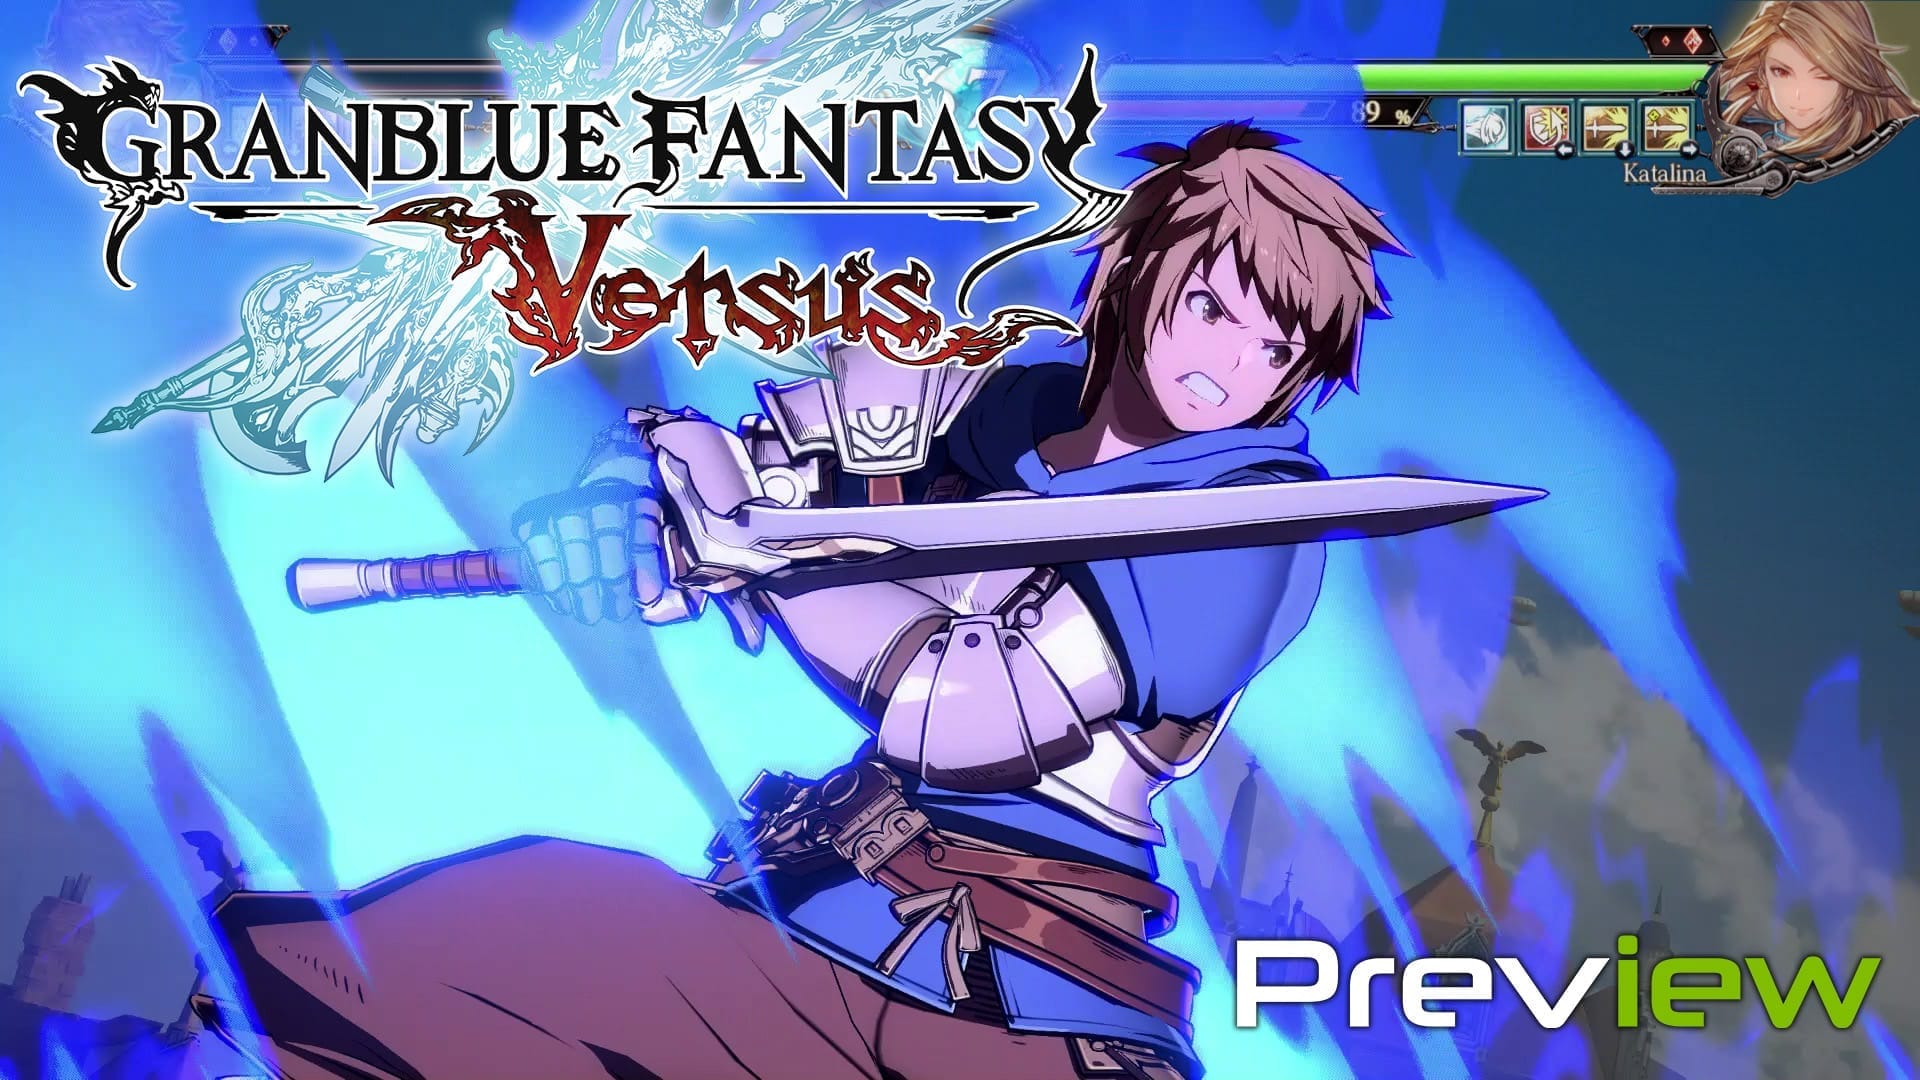 Granblue Fantasy Versus Coming to PC Via Steam on March 13th